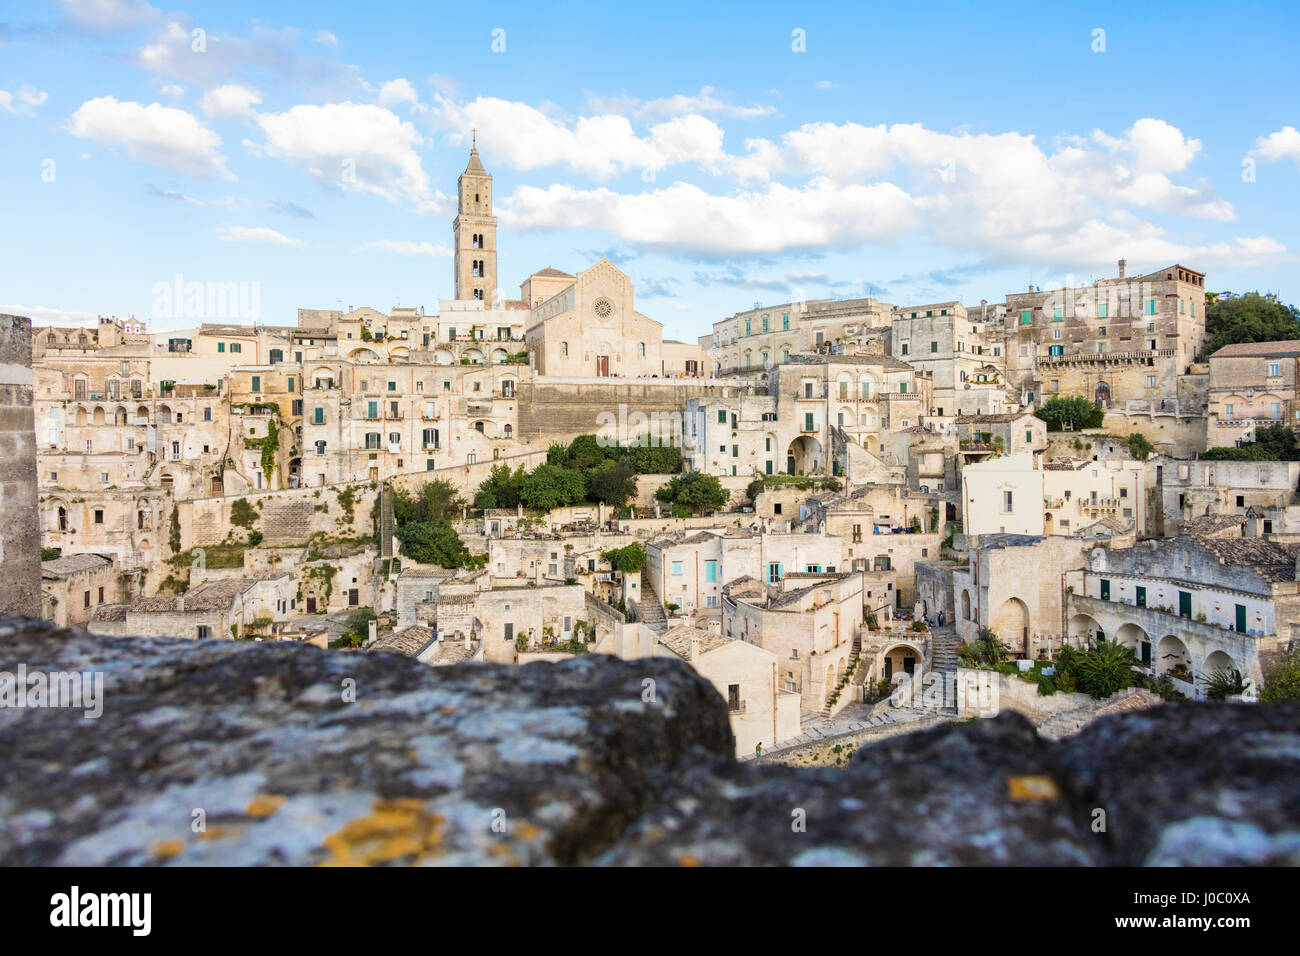 View of the ancient town and historical center called Sassi, perched on rocks on top of hill, Matera, Basilicata, Italy Stock Photo